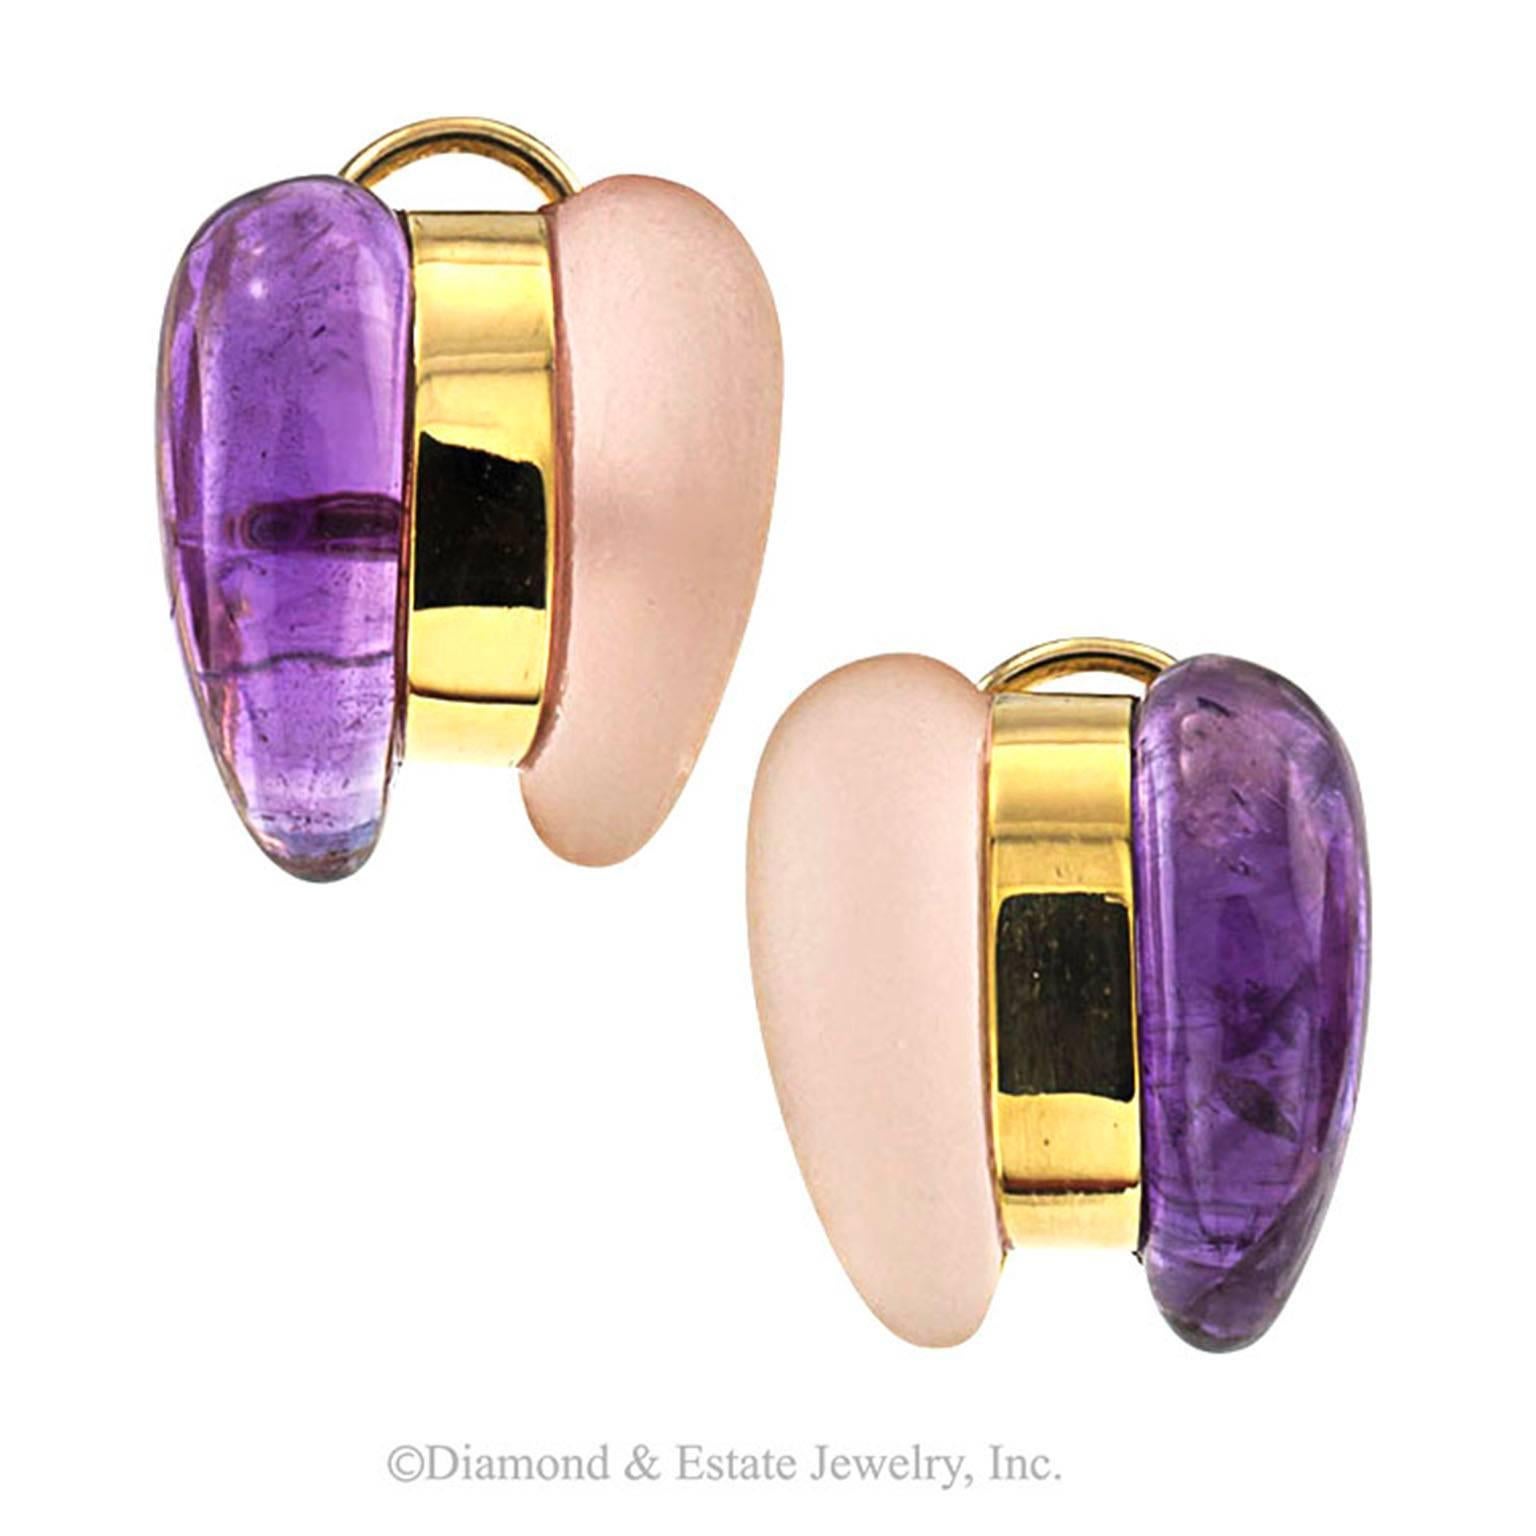 WINC Creations Estate Amethyst and Rose Quartz Earrings

Eye candy comes in many flavors, like royal amethyst and frosted rose quartz... as in this pair of super chic earrings.  They are clearly left and right.  That gives you choices... switching